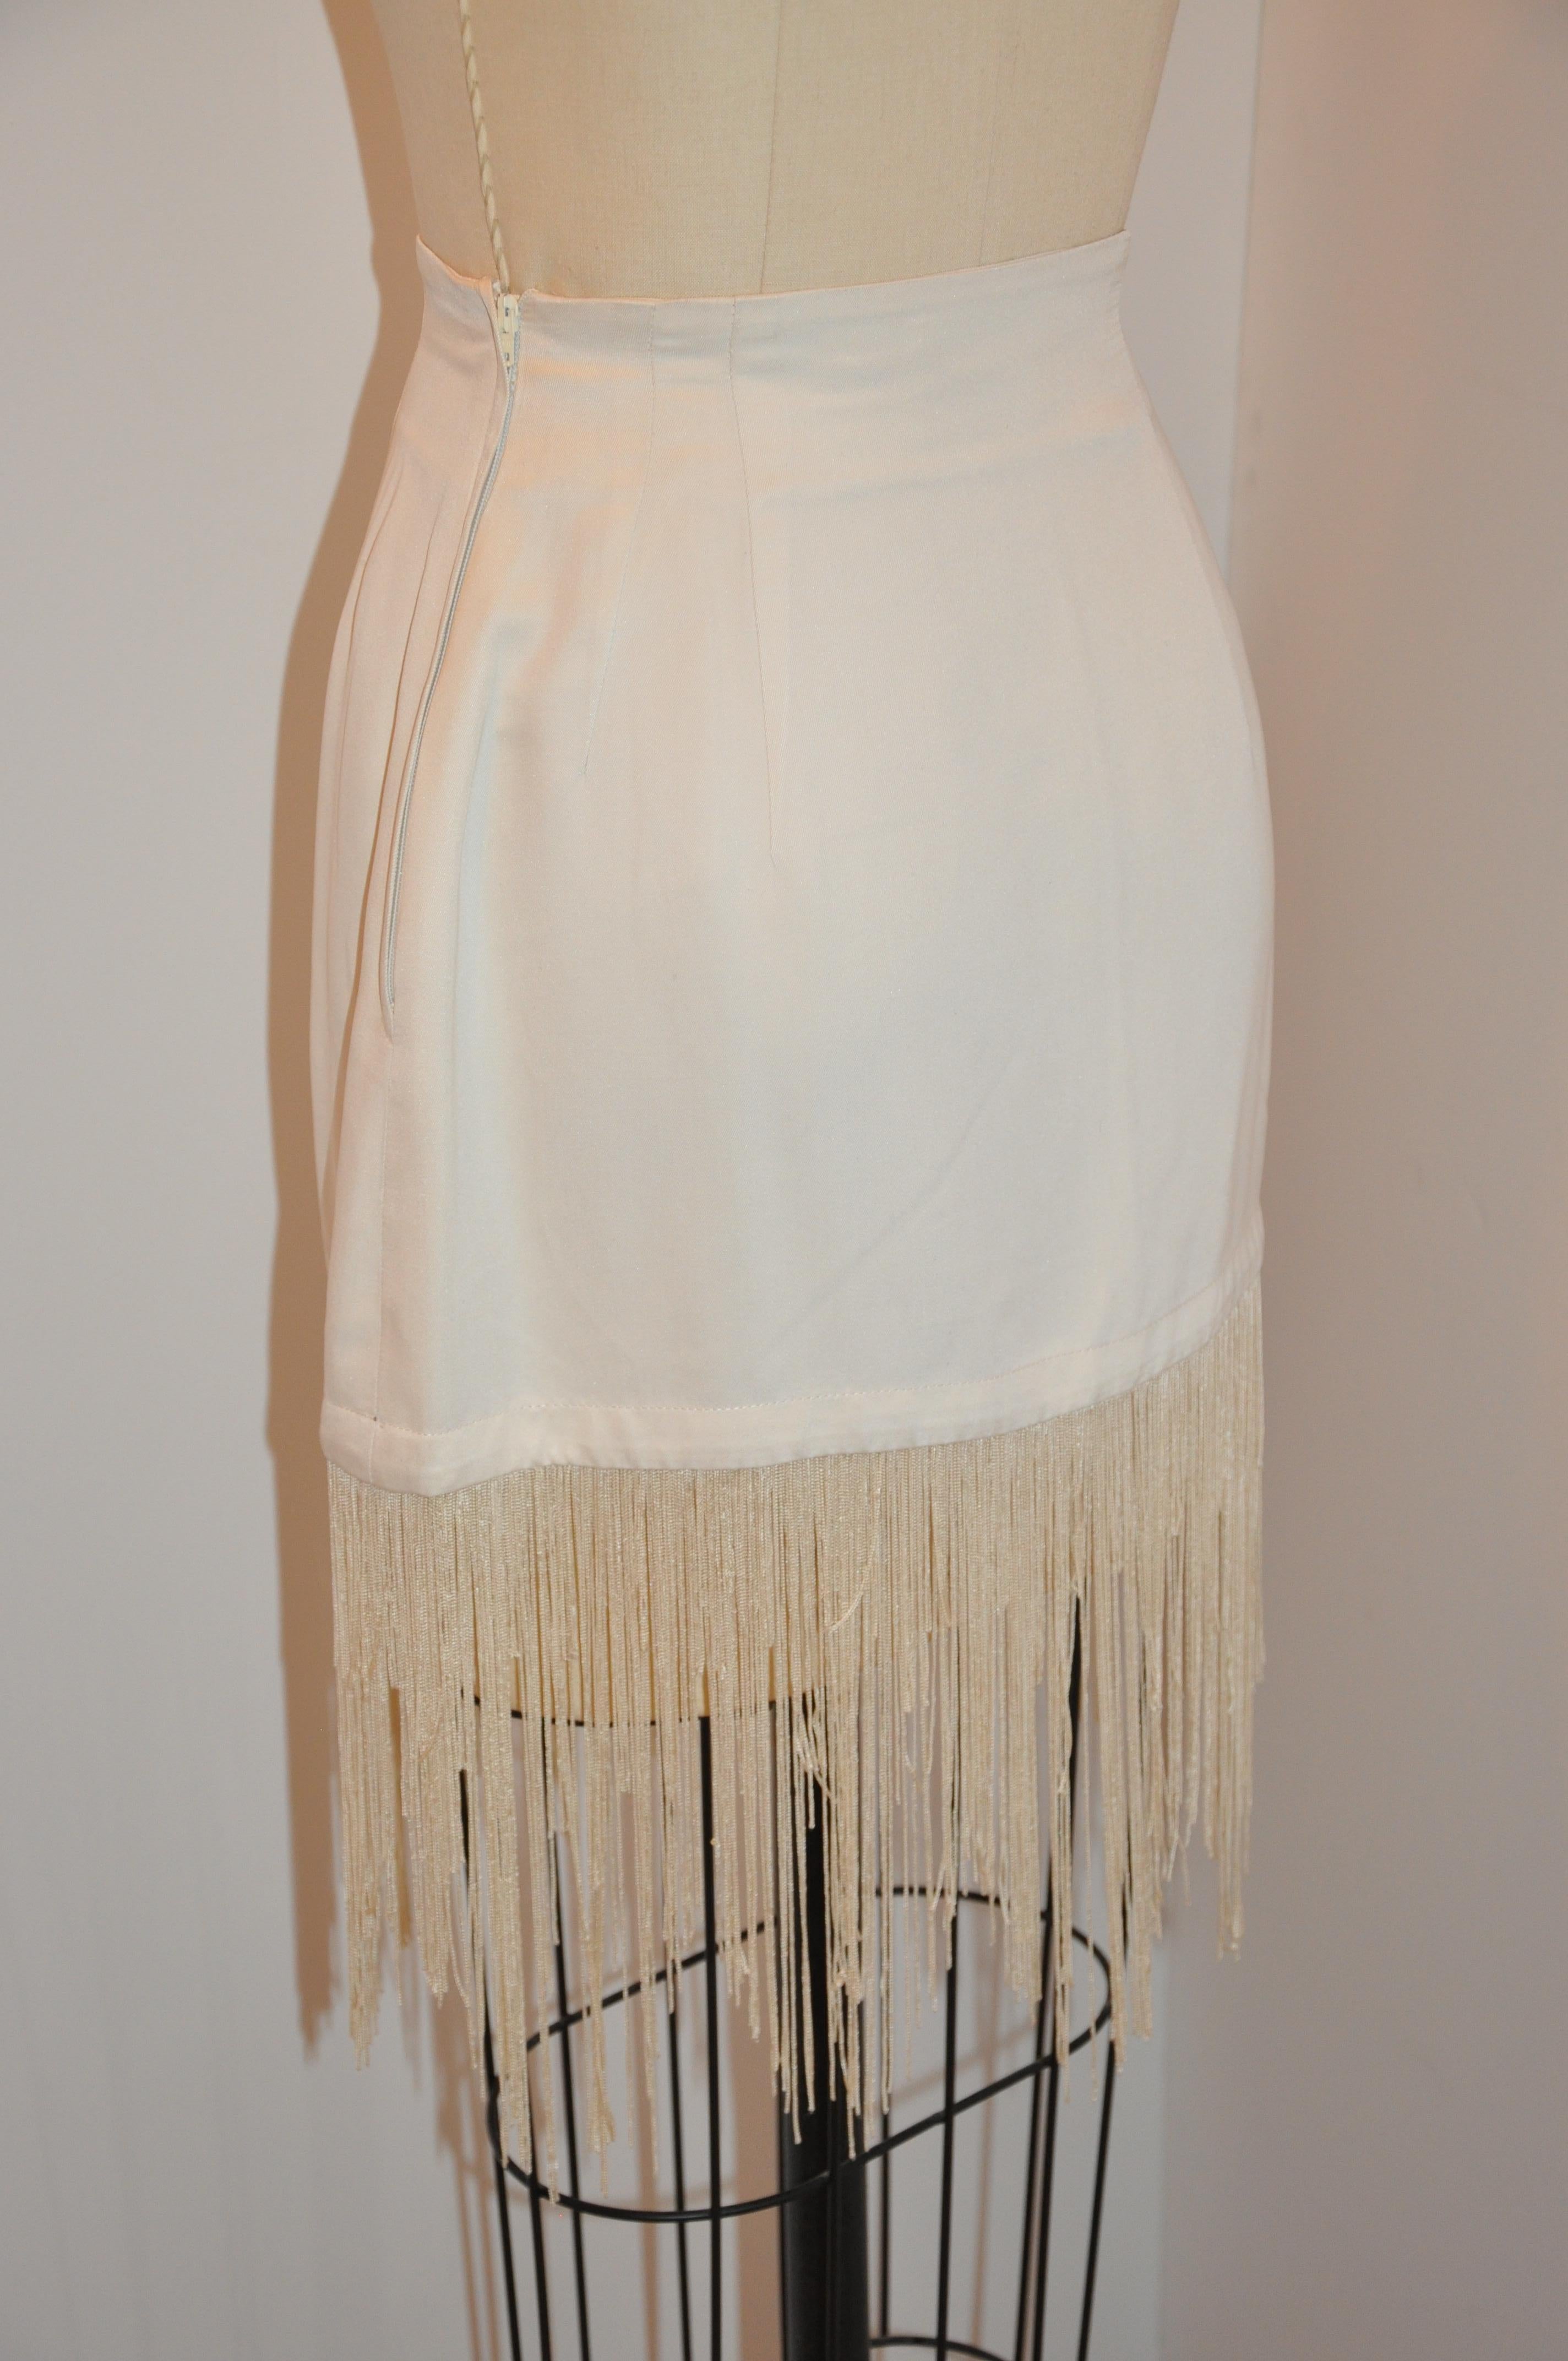 Rare Ozbek whimsical cream 2-piece cream silk mini skirt with multi-length fringes measures 13 1/2 inches (without fringe) in length. fringes are 9 inches, side zipper is 8 inches, waist is 25 inches, hem is 38 inches, hips are 38 inches.
The blazer